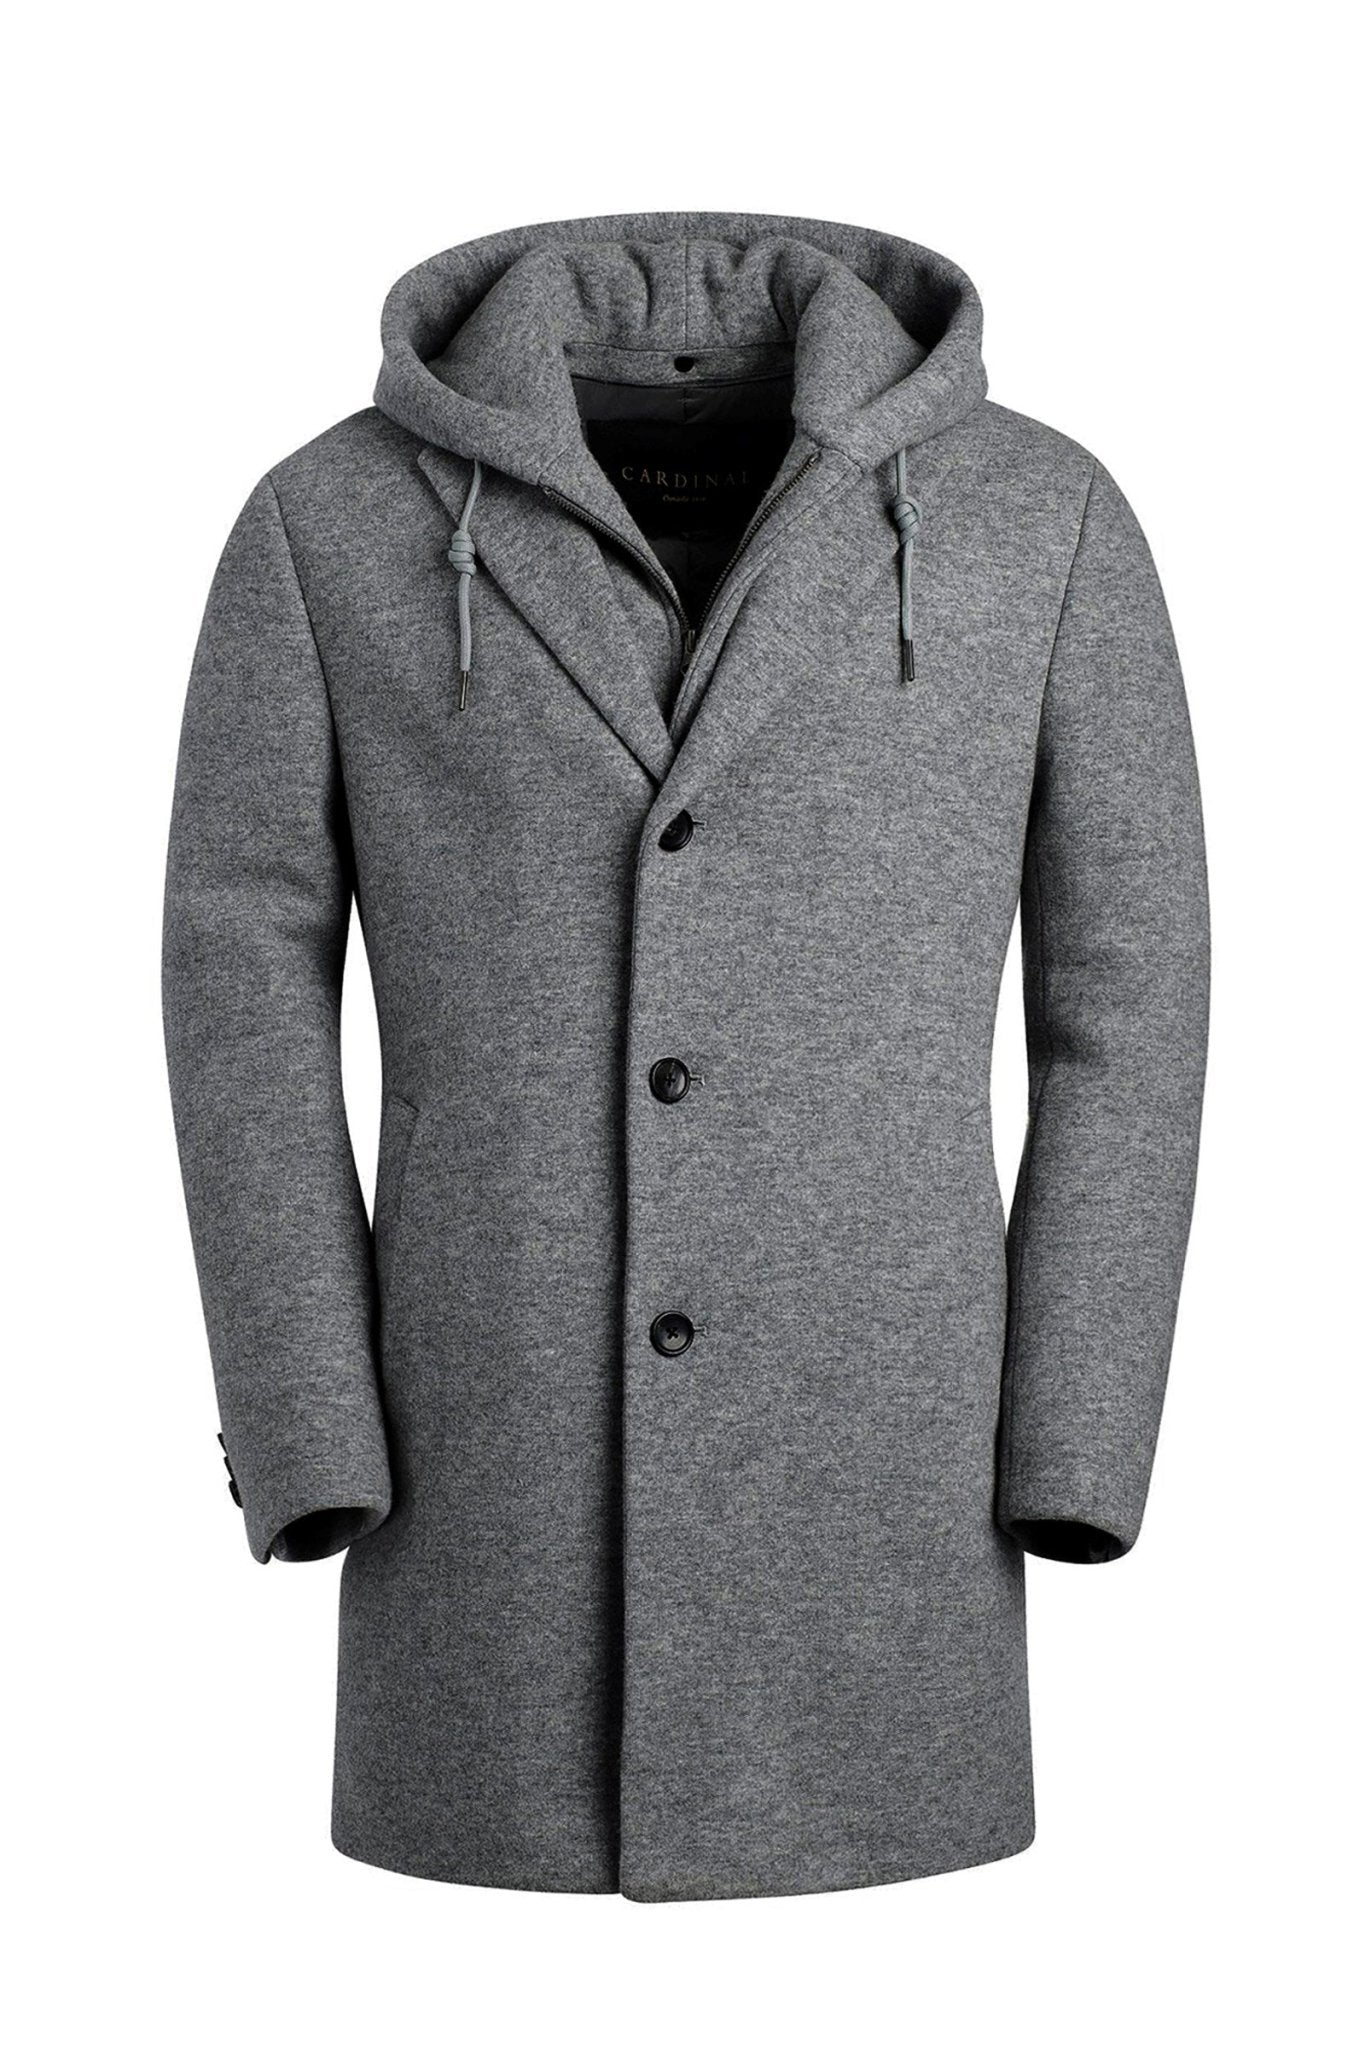 TYSON CHARCOAL TOPCOAT - MENS - Cardinal of Canada-US-Tyson - charcoal wool topcoat 36 inch length